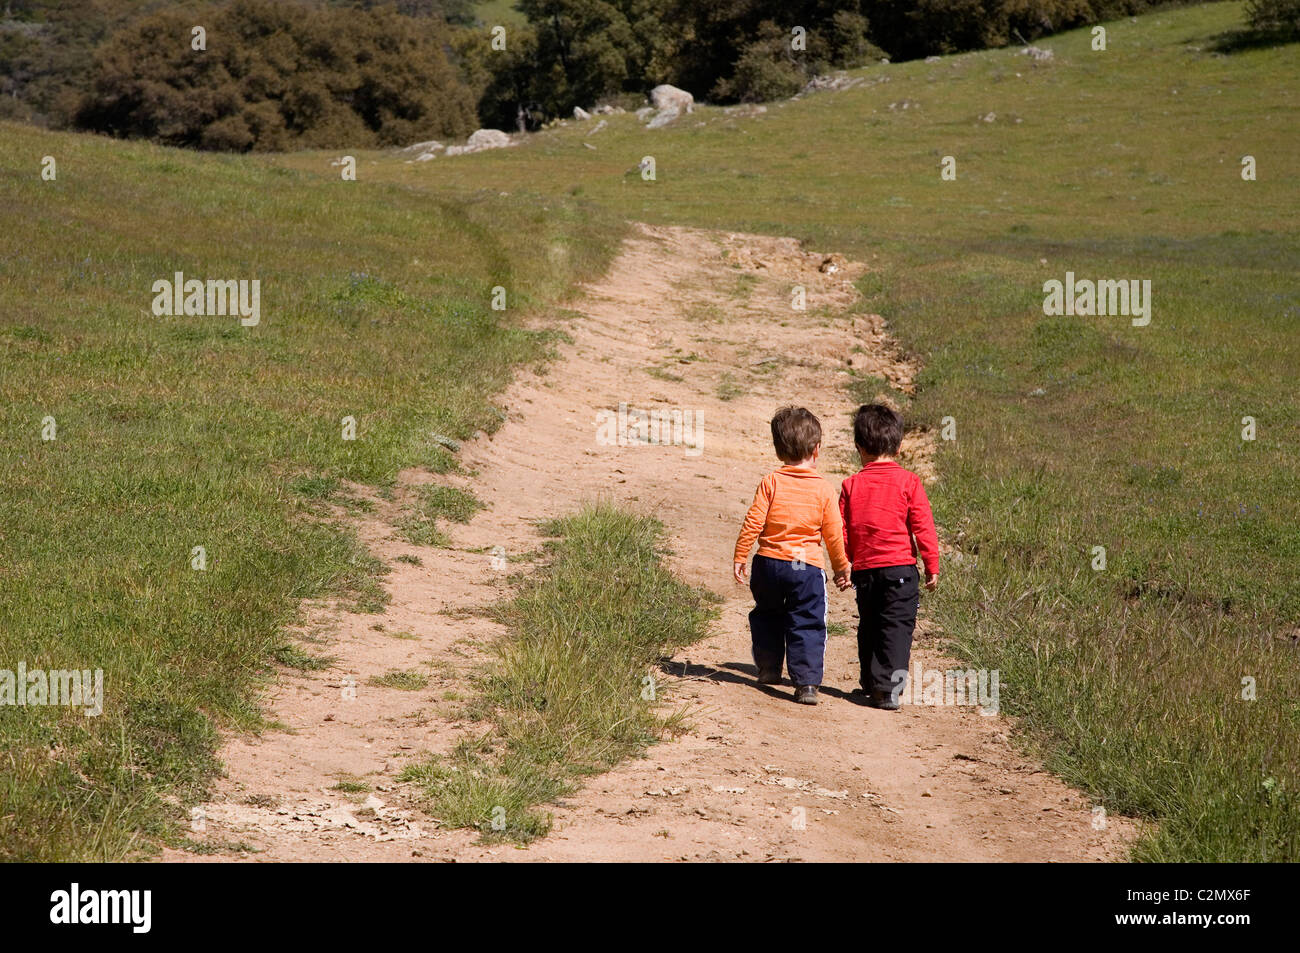 Two brothers hiking on a trail, 3 and 4 years old, Santa Ysabel Open Space, San Diego County, California (MR) Stock Photo